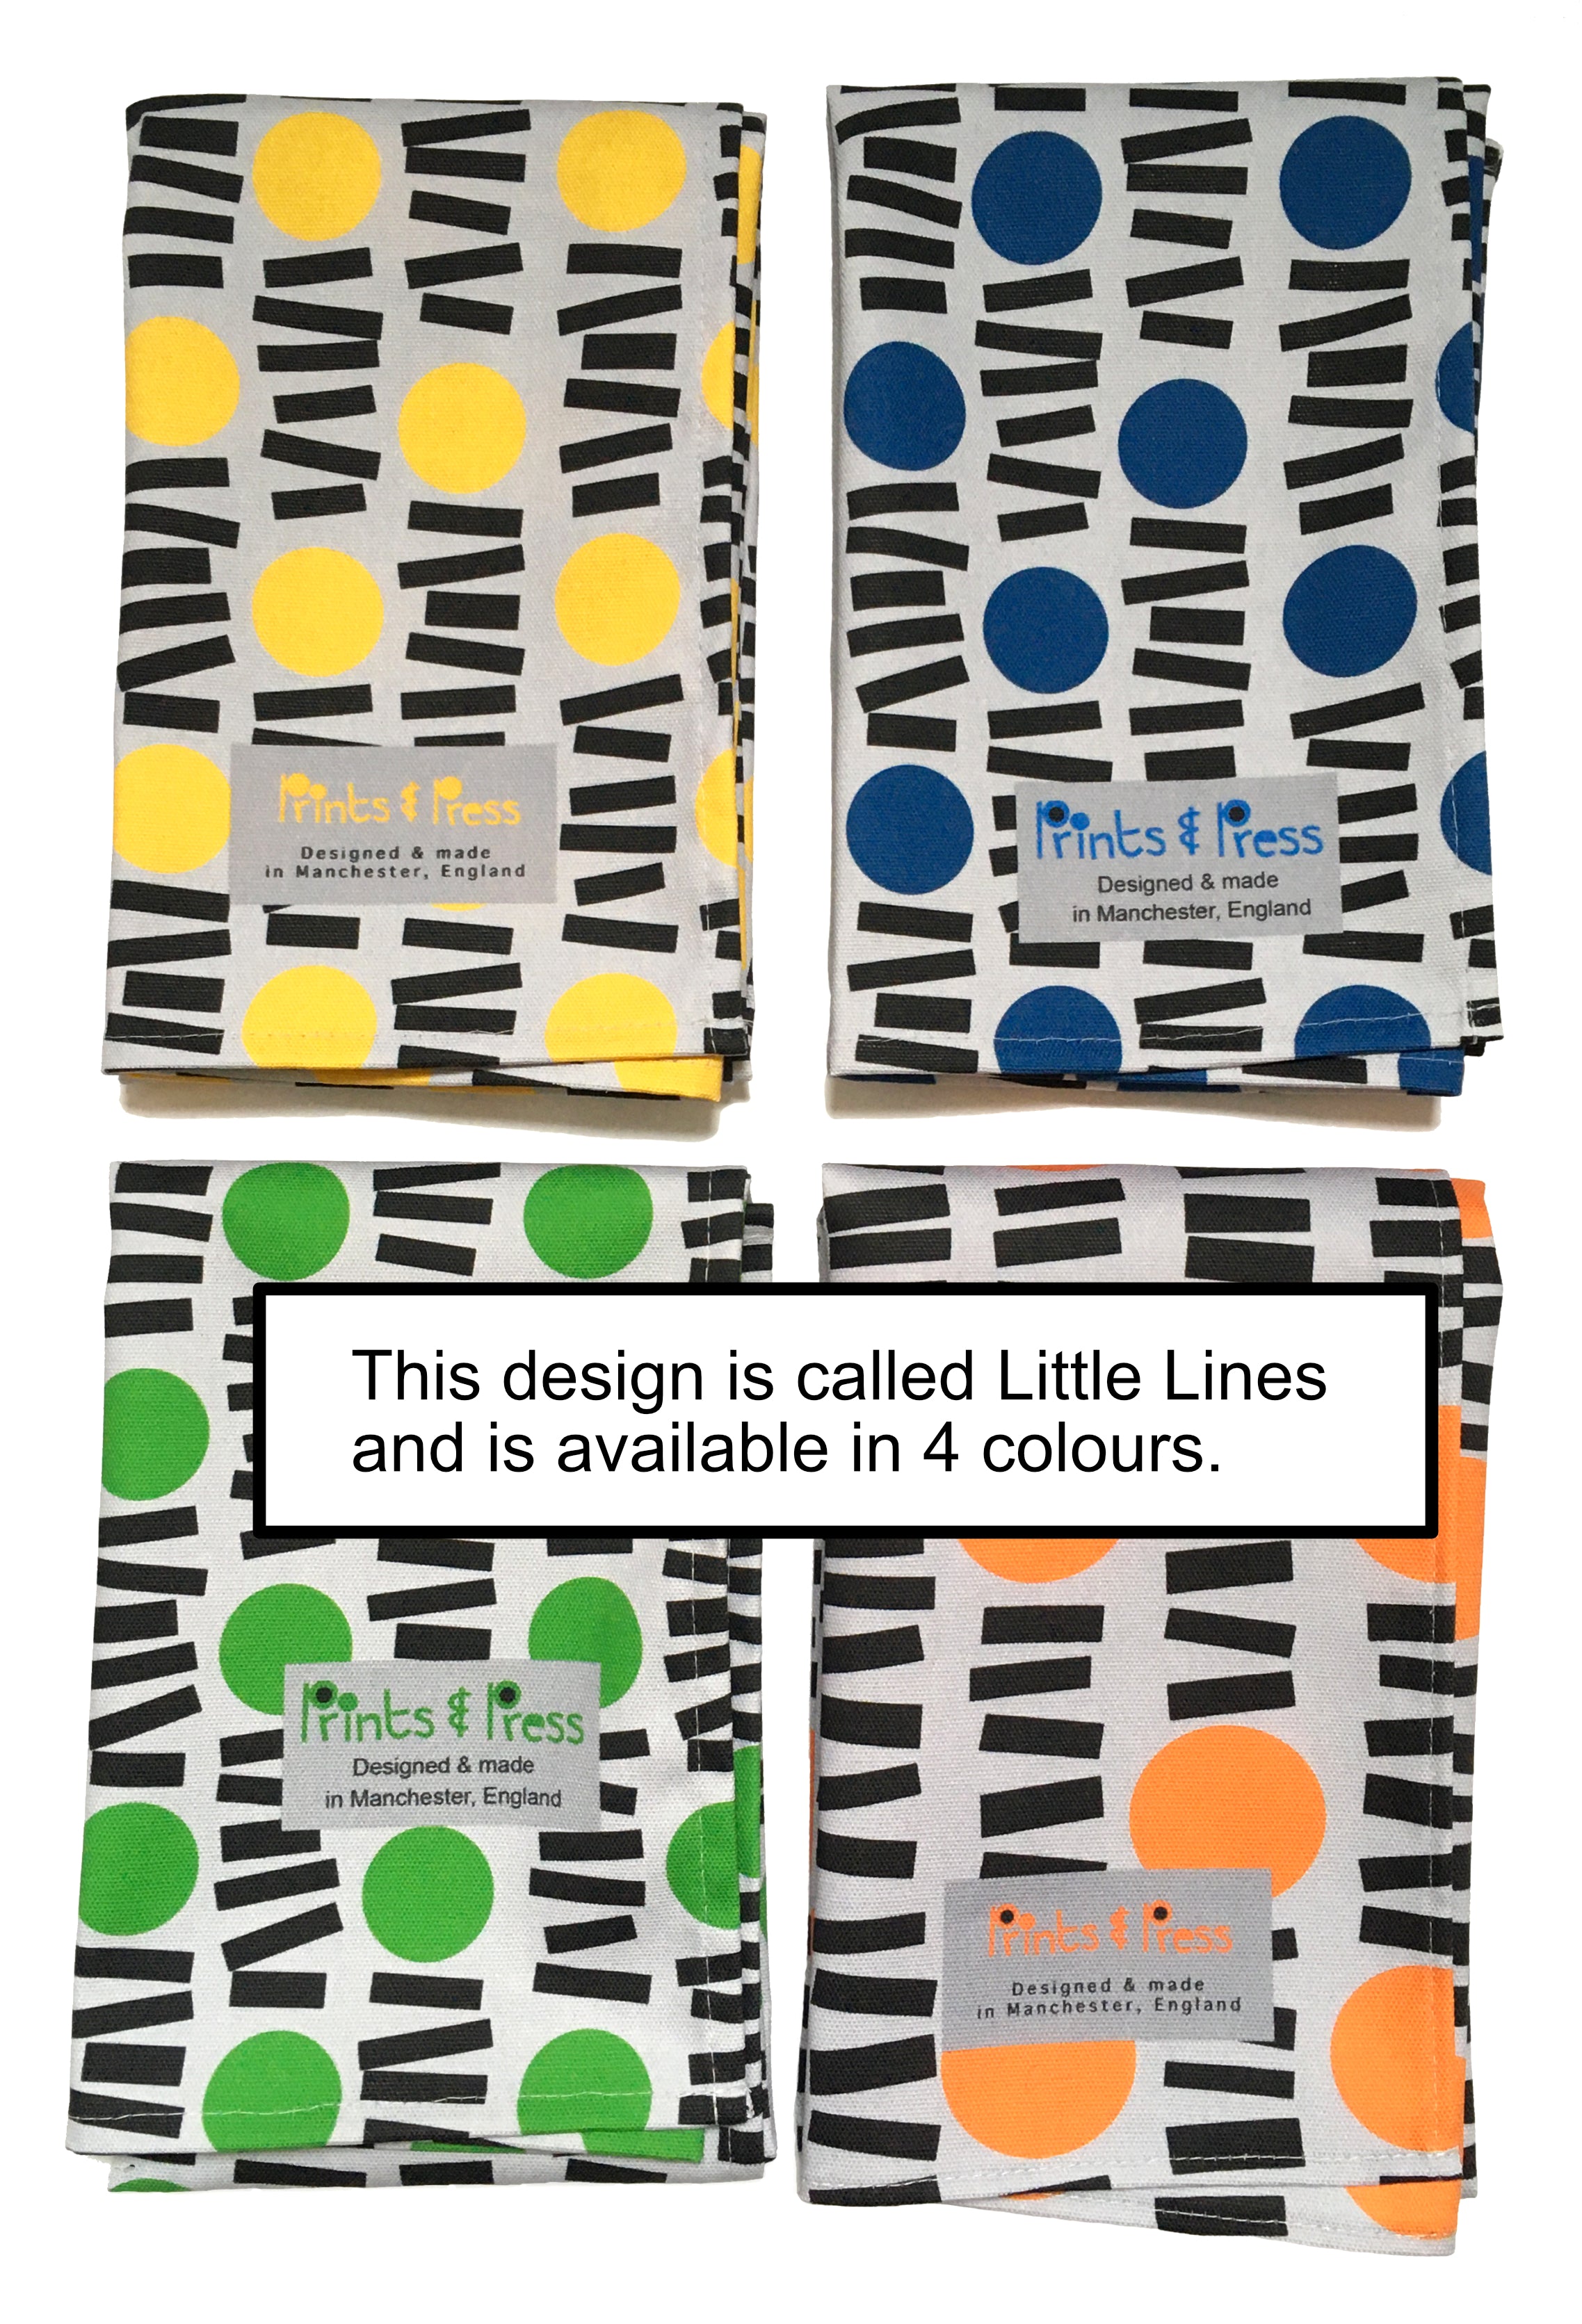 Green Teatowel - choose your favourite!